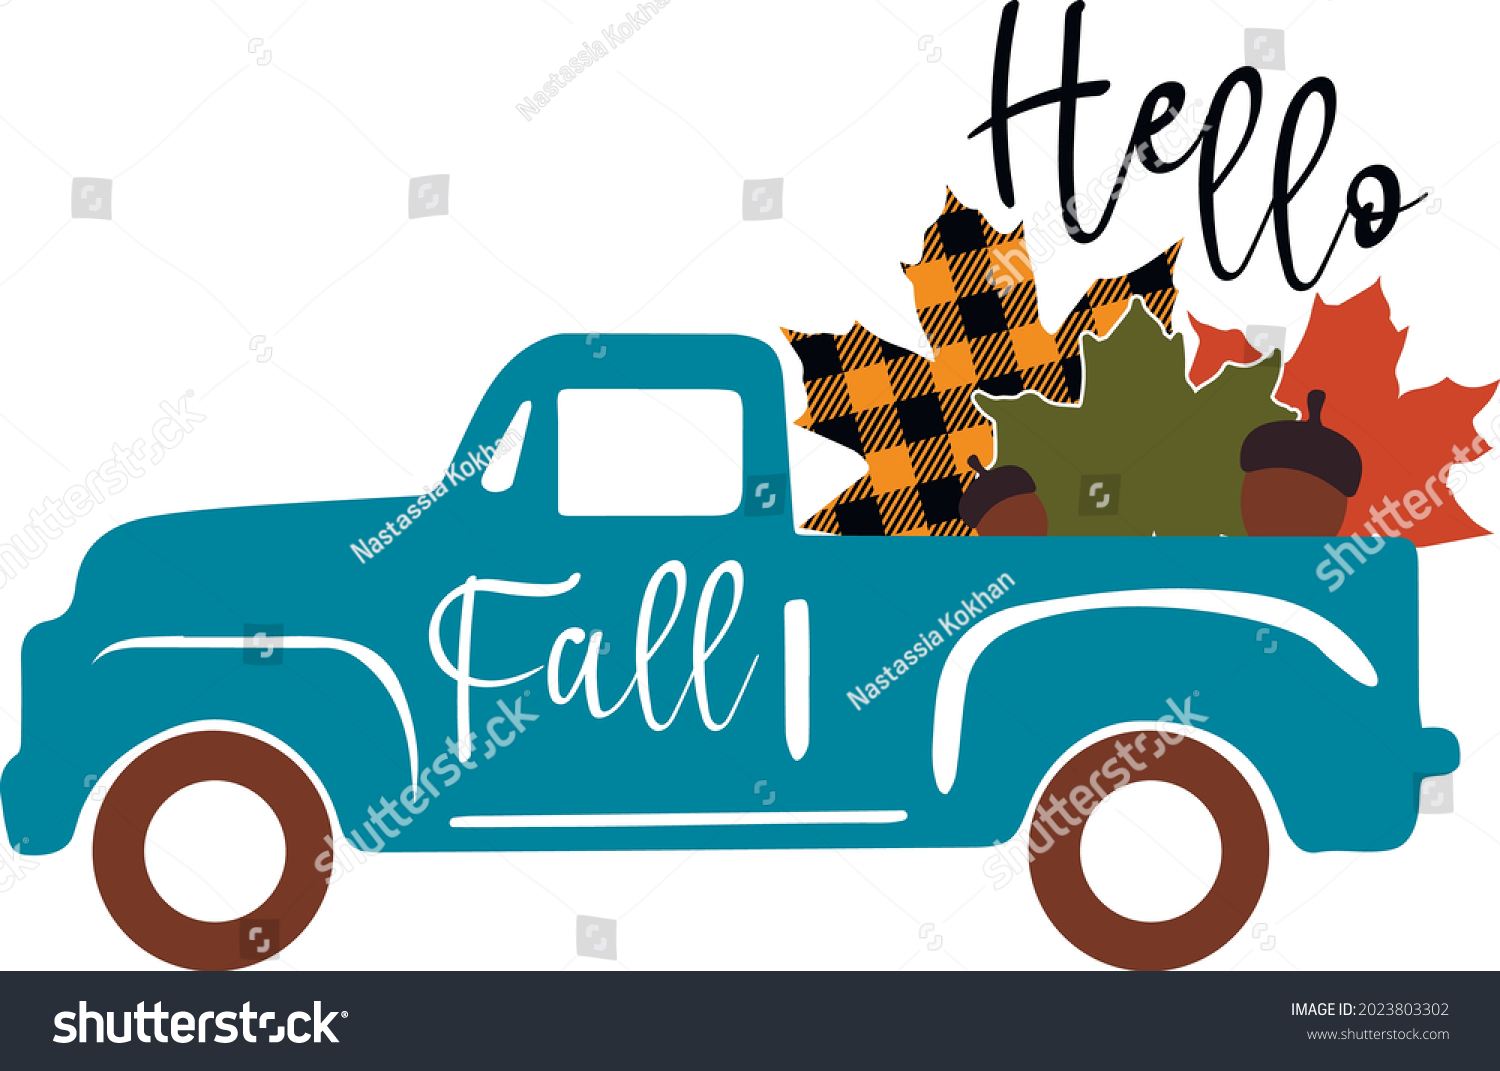 SVG of Fall truck with pumpkin svg vector Illustration isolated on white background.Happy fall truck shirt design. Pumpkin truck for autumn shirt design. Fall sublimation. Hello autumn truck with leaves svg